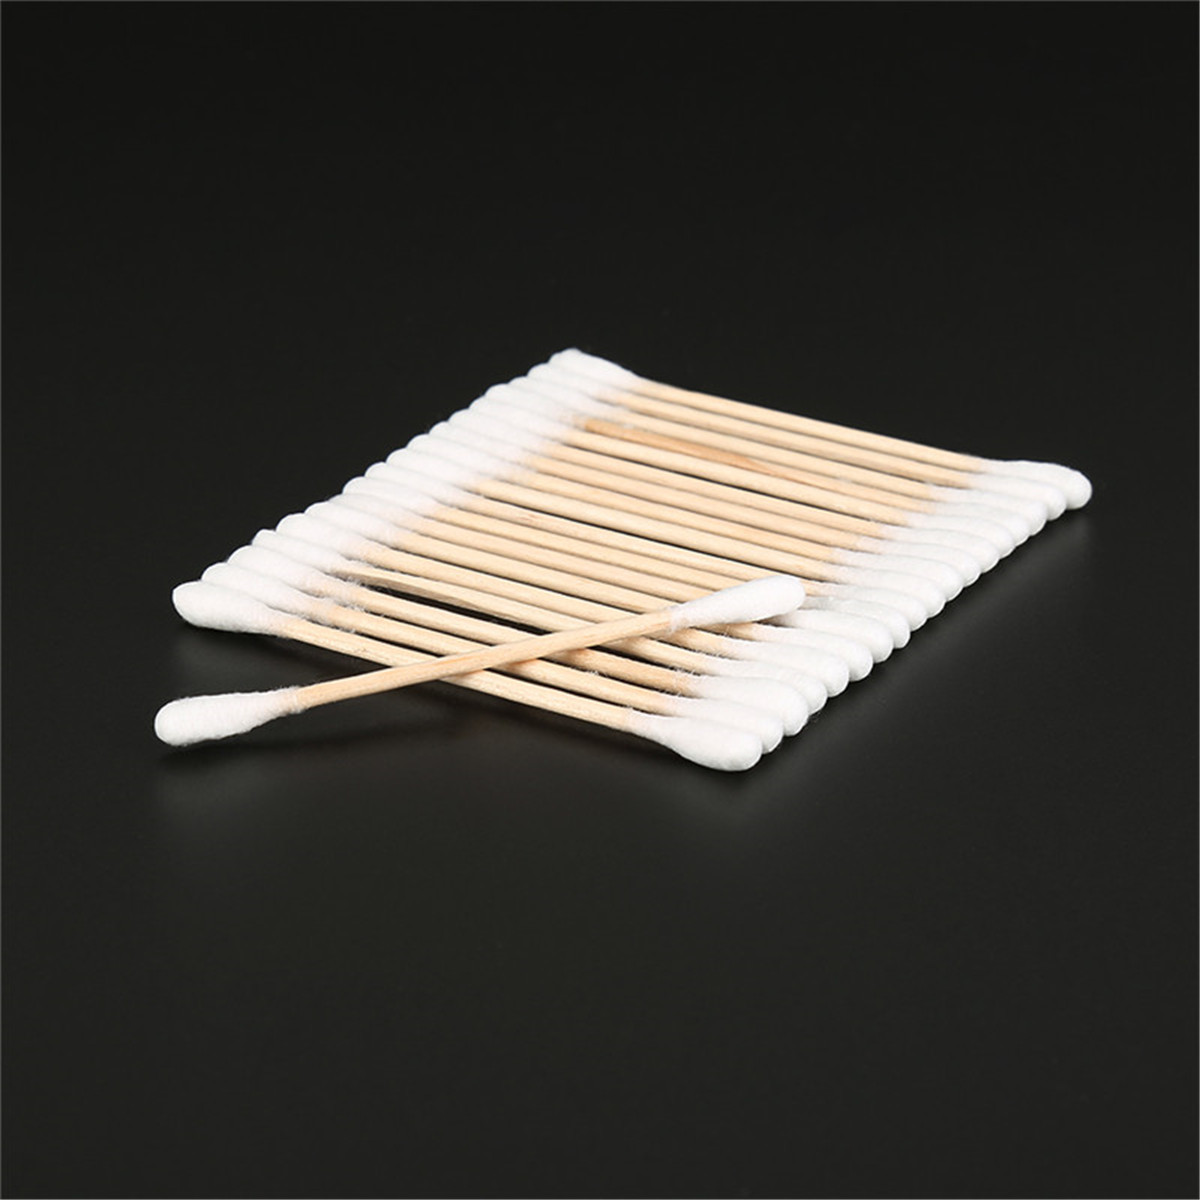 100x-Cotton-Swabs-Swab-Applicator-Q-Tips-Double-Head-Wooden-Stick-Cleaning-Tools-1582736-7